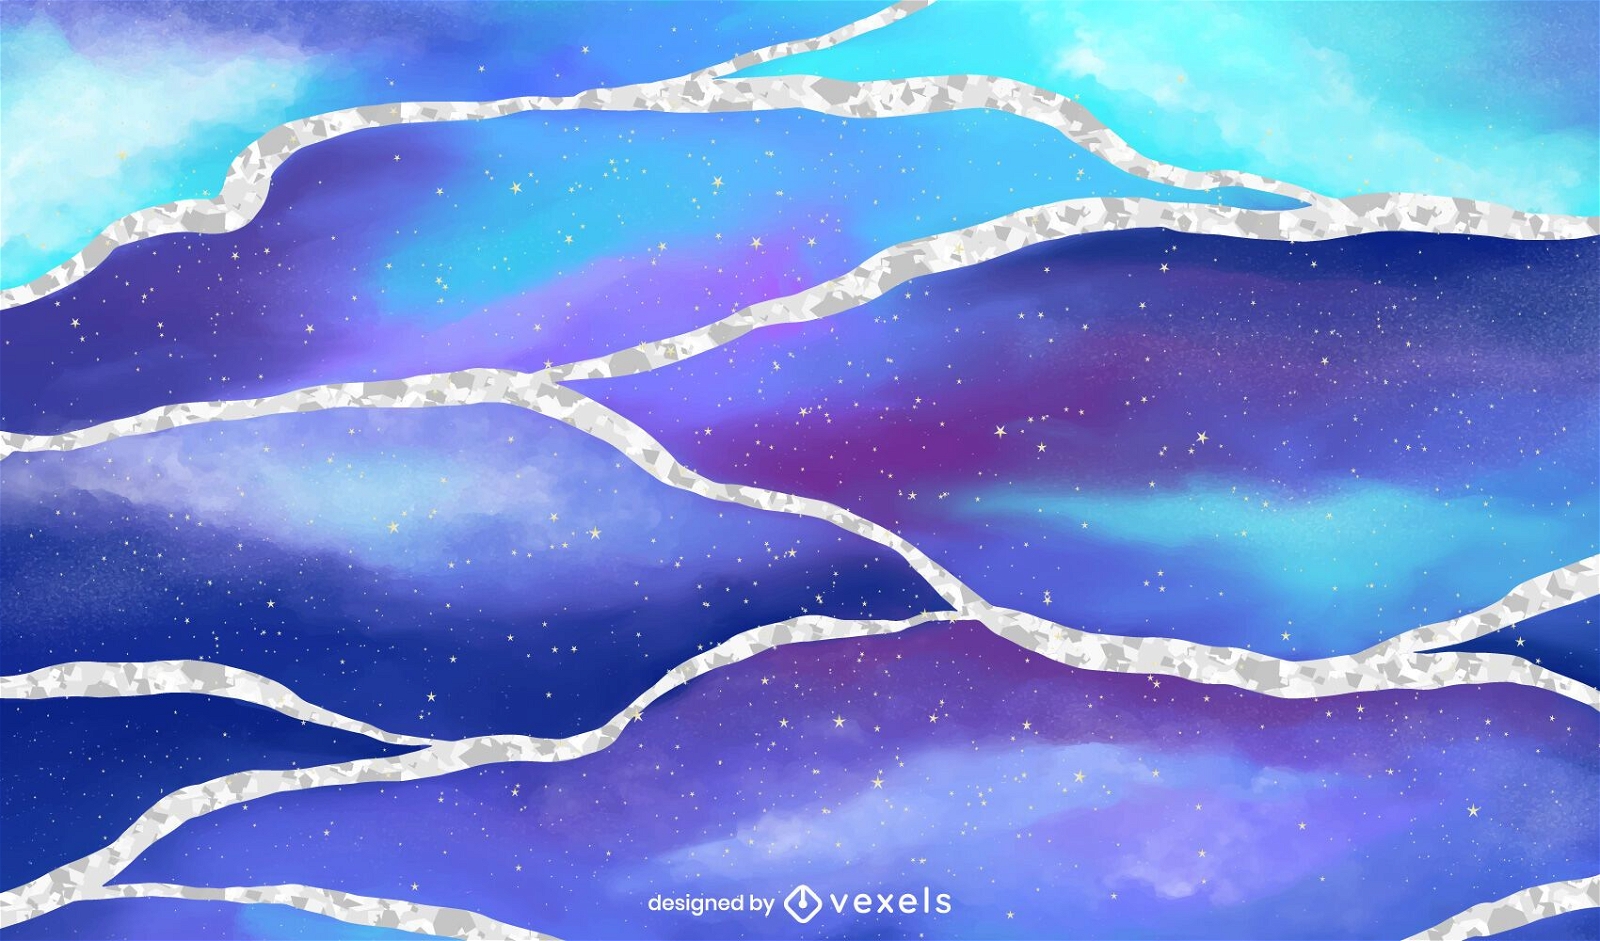 Outer space background design